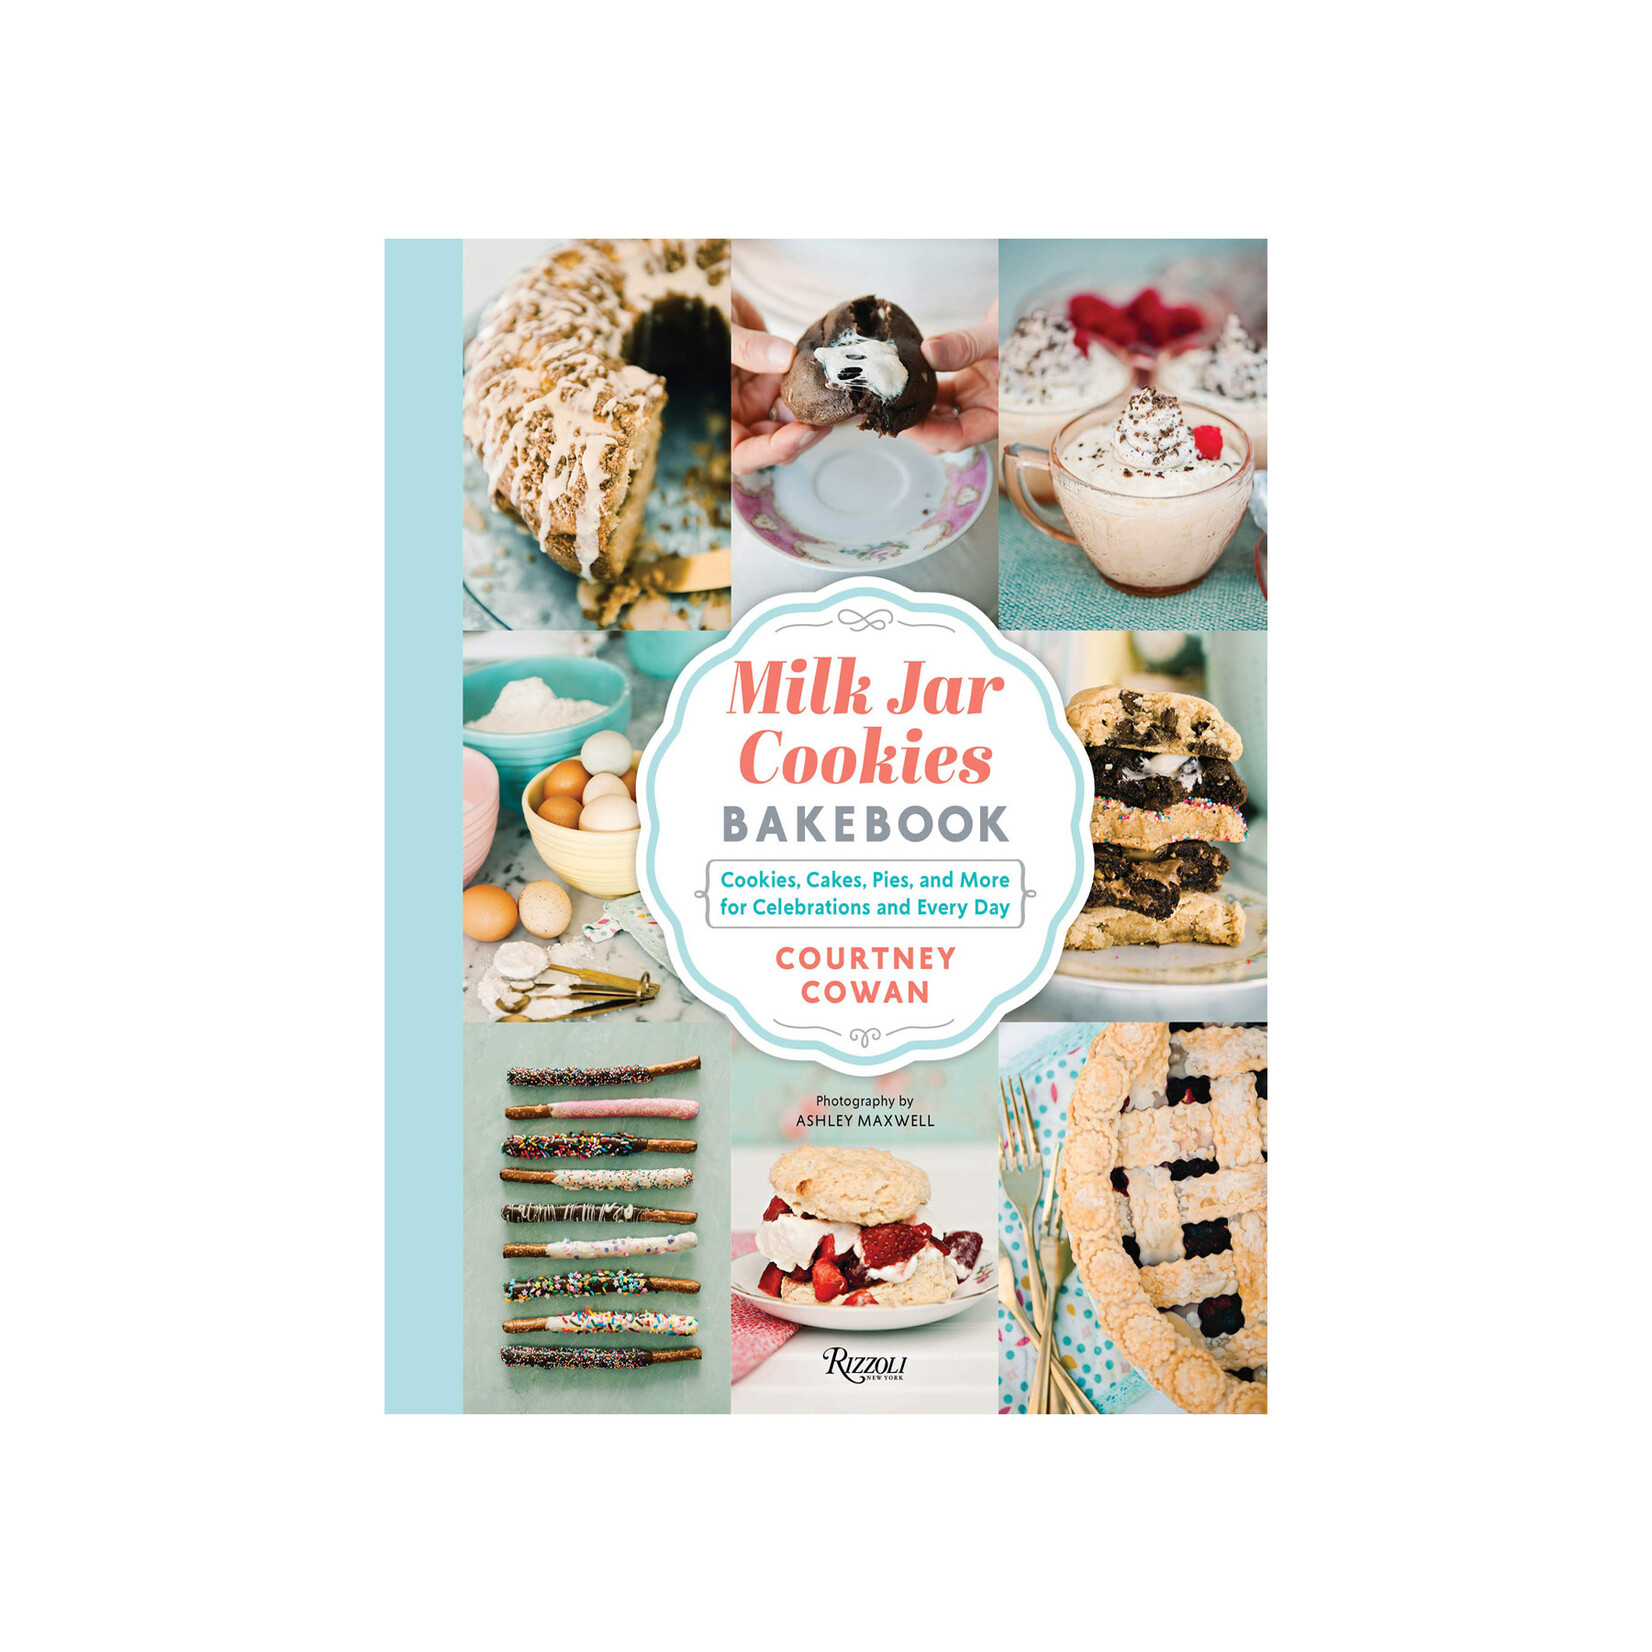 Milk Jar Cookies Bakebook: Cookies, Cakes, Pies and More for Celebrations and Every Day